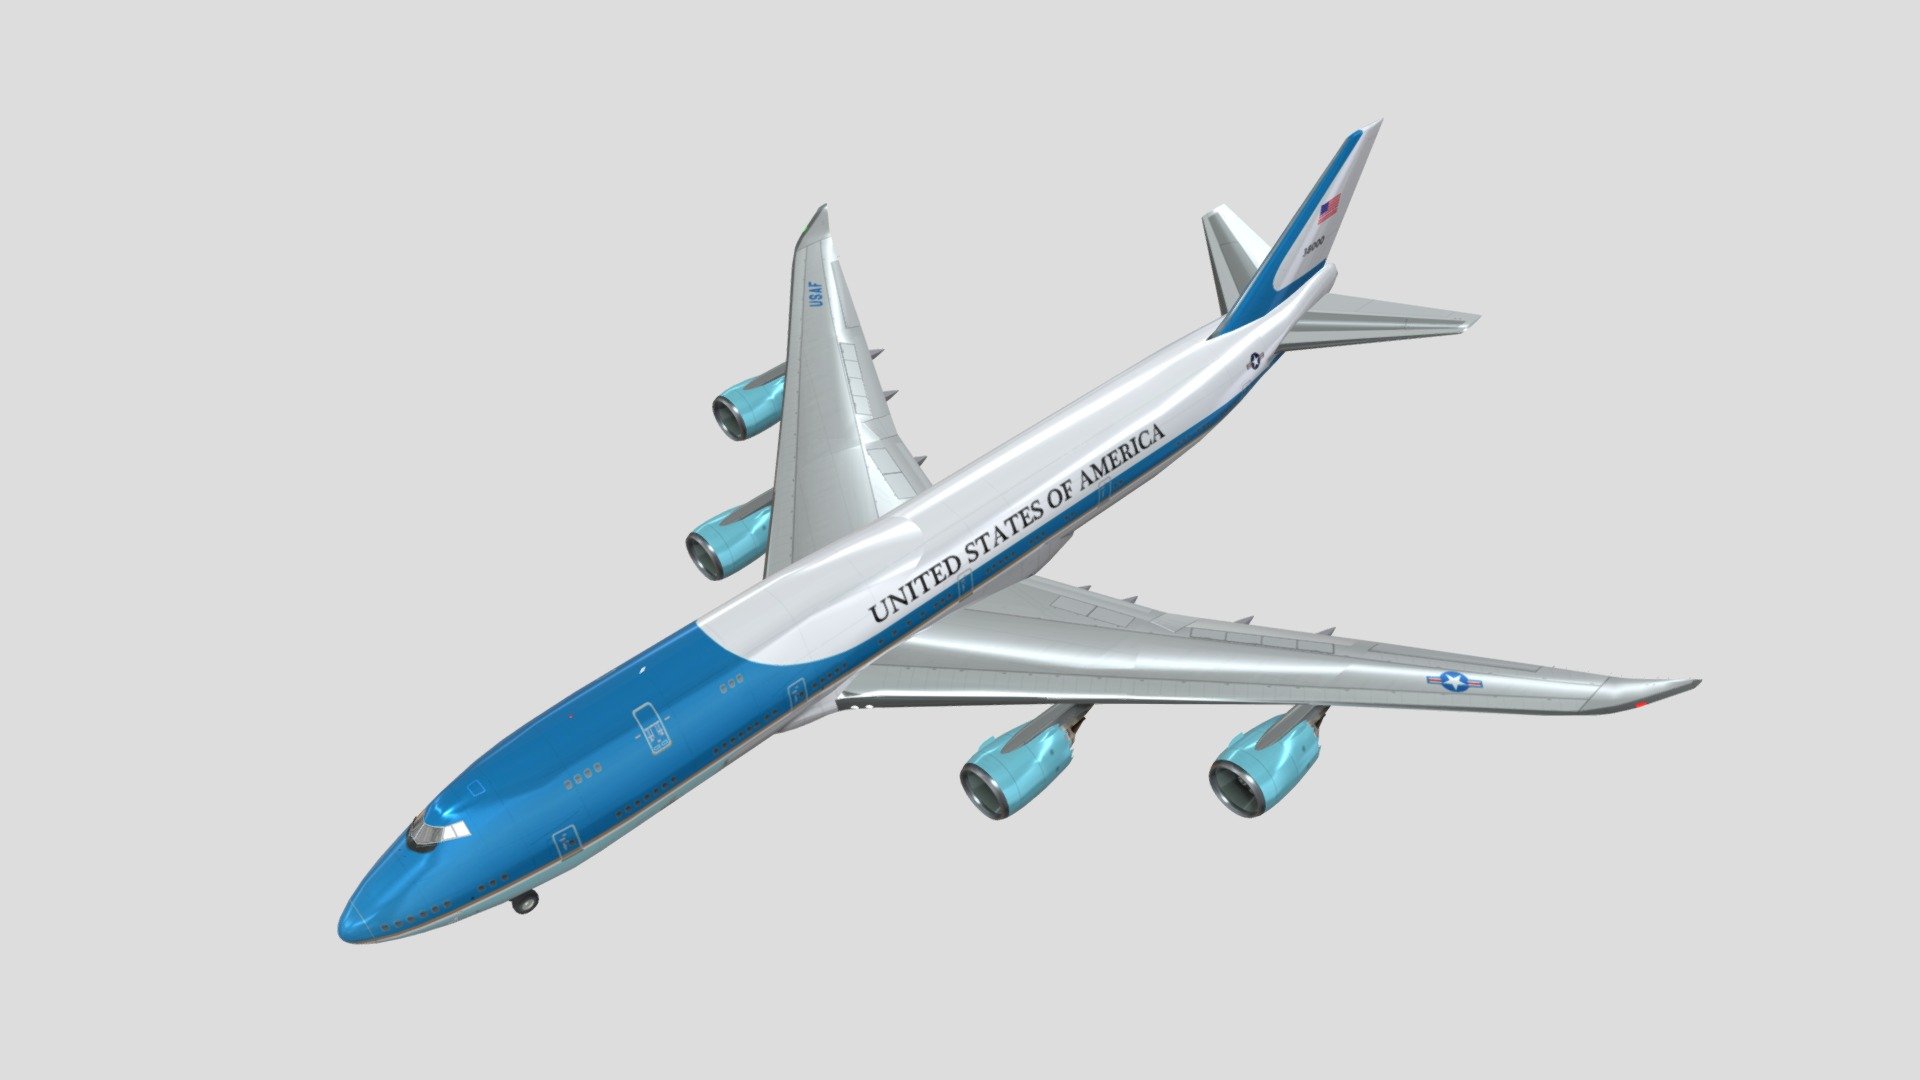 The Boeing VC-25 is a passenger aircraft designated by the United States Air Force, a military version of the Boeing 747 passenger aircraft. Model A, the VC-25A, is the only model of the VC-25. The VC-25 is best known as Air Force One, whose call sign is any United States Air Force aircraft bearing the President of the United States 3d model